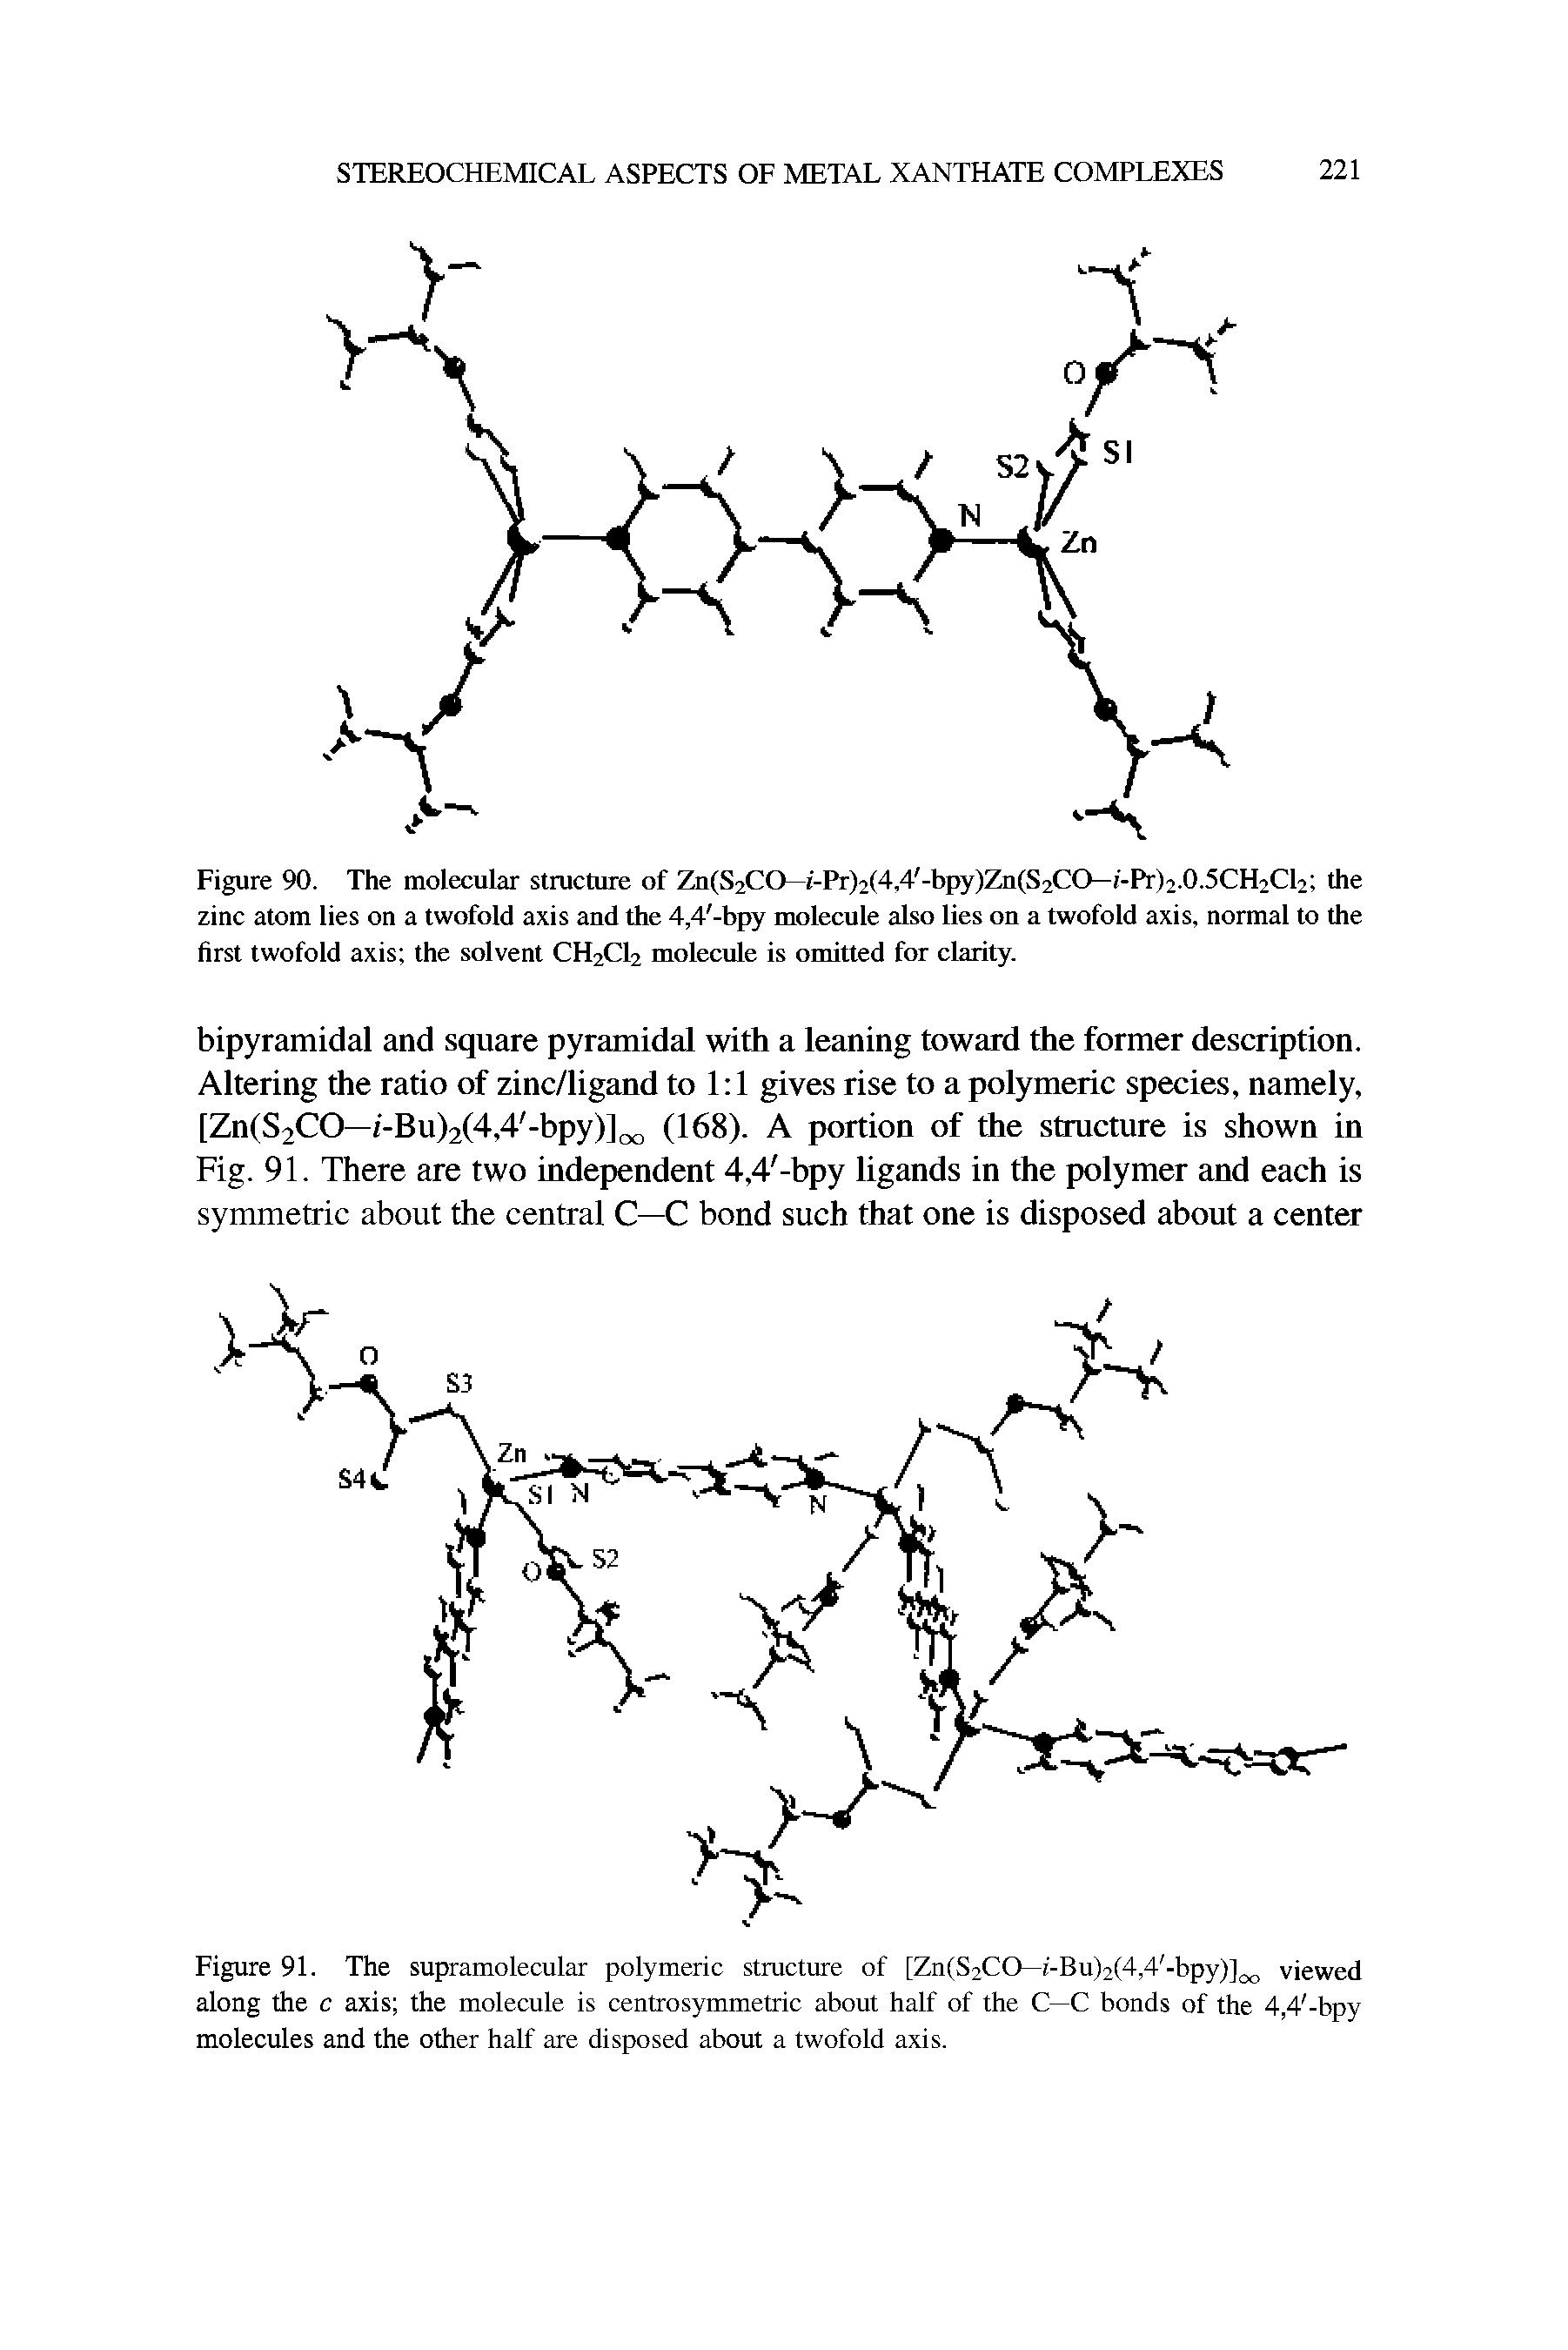 Figure 91. The supramolecular polymeric structure of [Zn(S2CO—i-Bu)2(4,4 -bpy)]00 viewed along the c axis the molecule is centrosymmetric about half of the C—C bonds of the 4,4 -bpy molecules and the other half are disposed about a twofold axis.